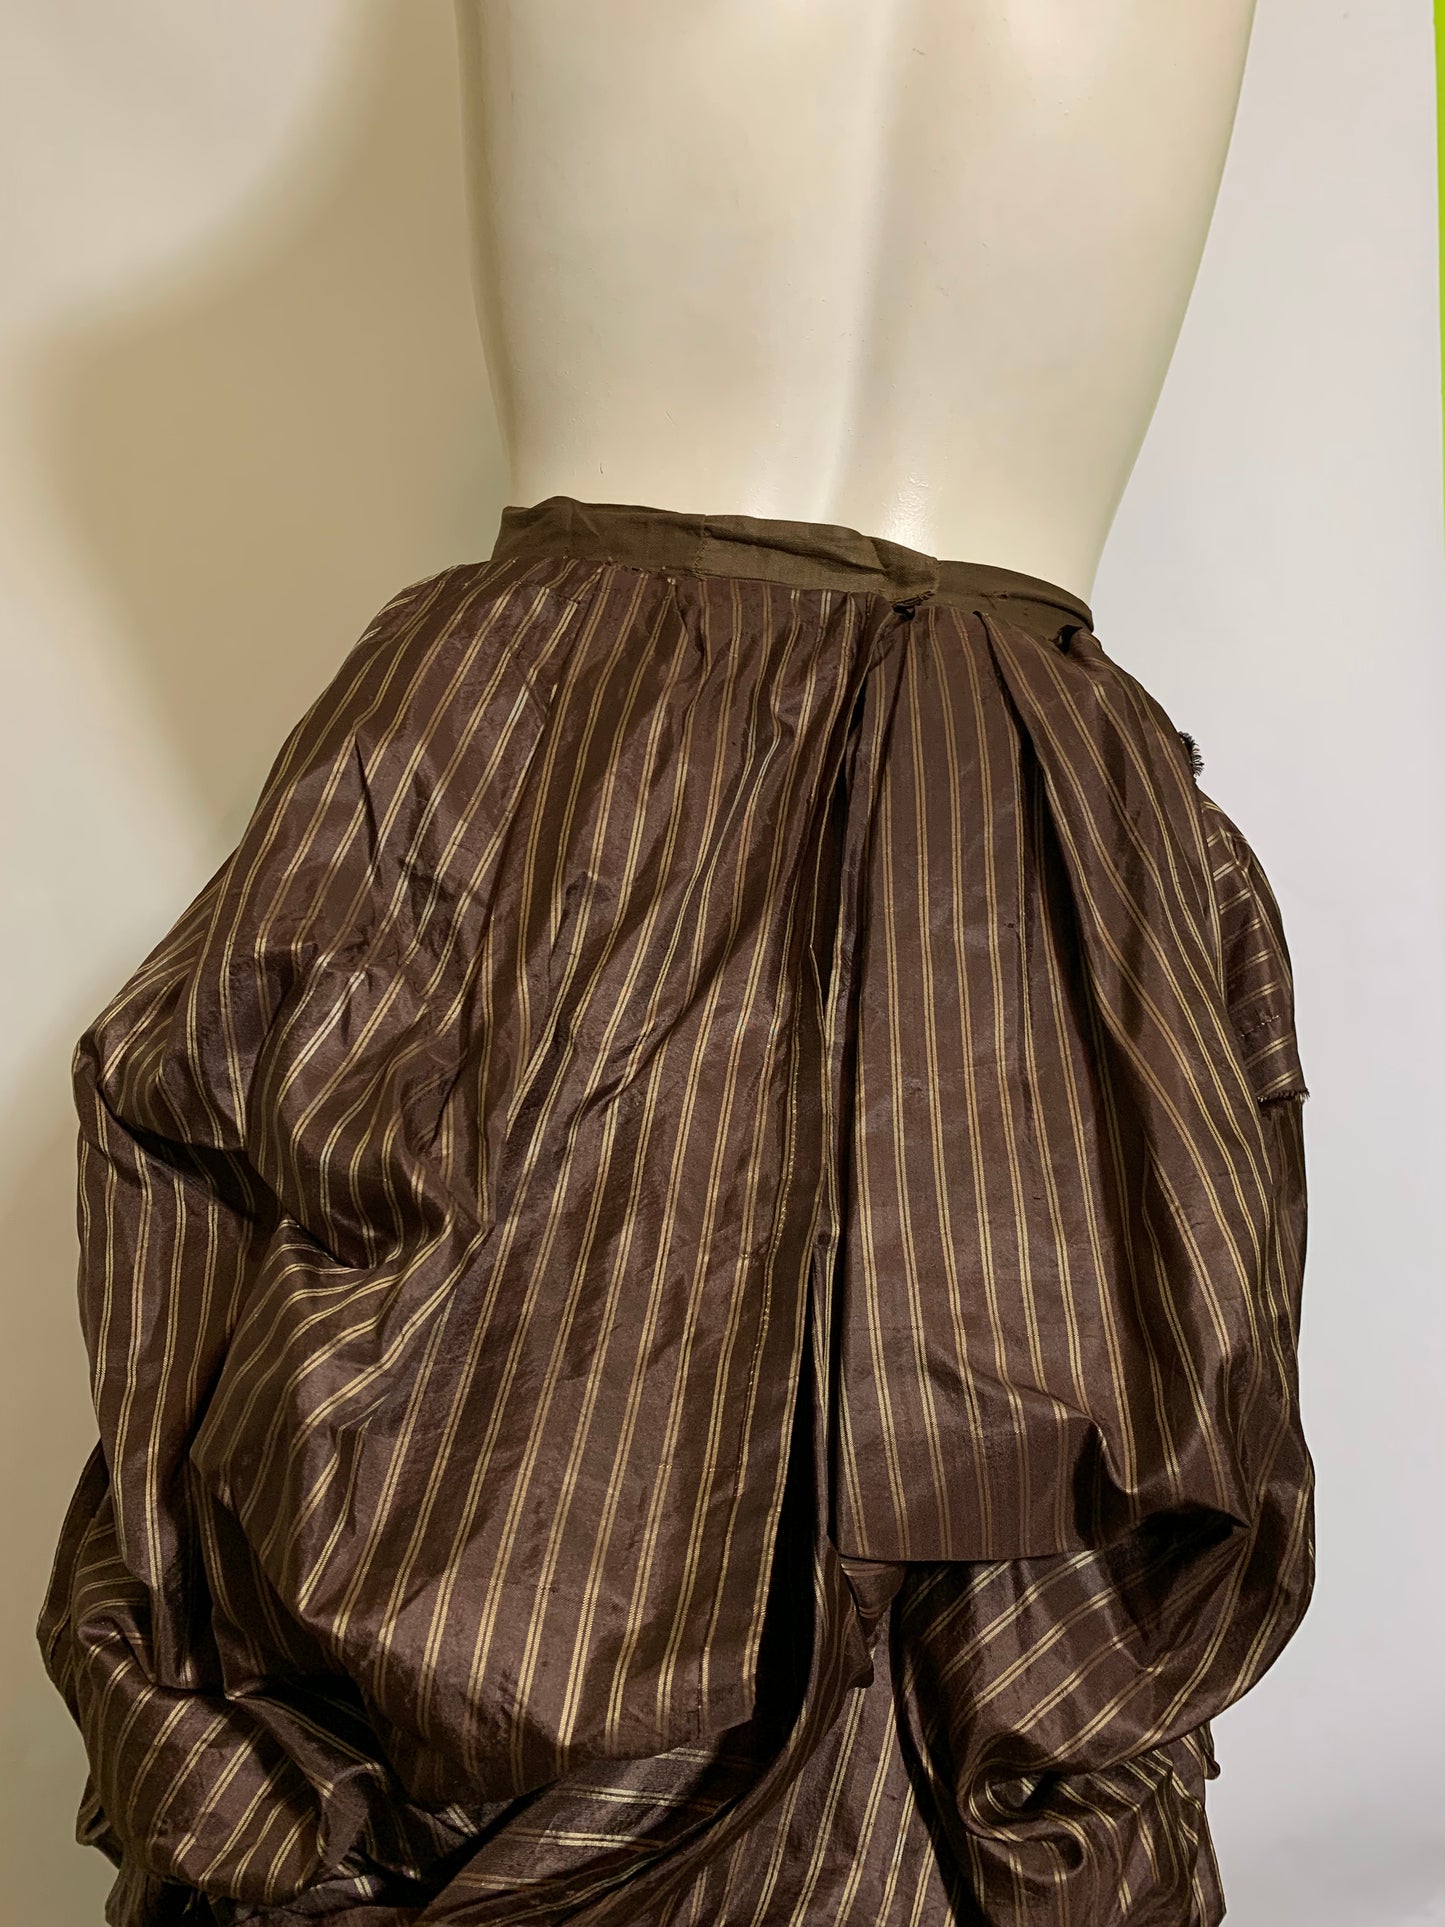 Curry and Cinnamon Pin Striped Silk 2 Piece Ruffled Bustle Back Skirt Dress with Glass Buttons circa 1880s